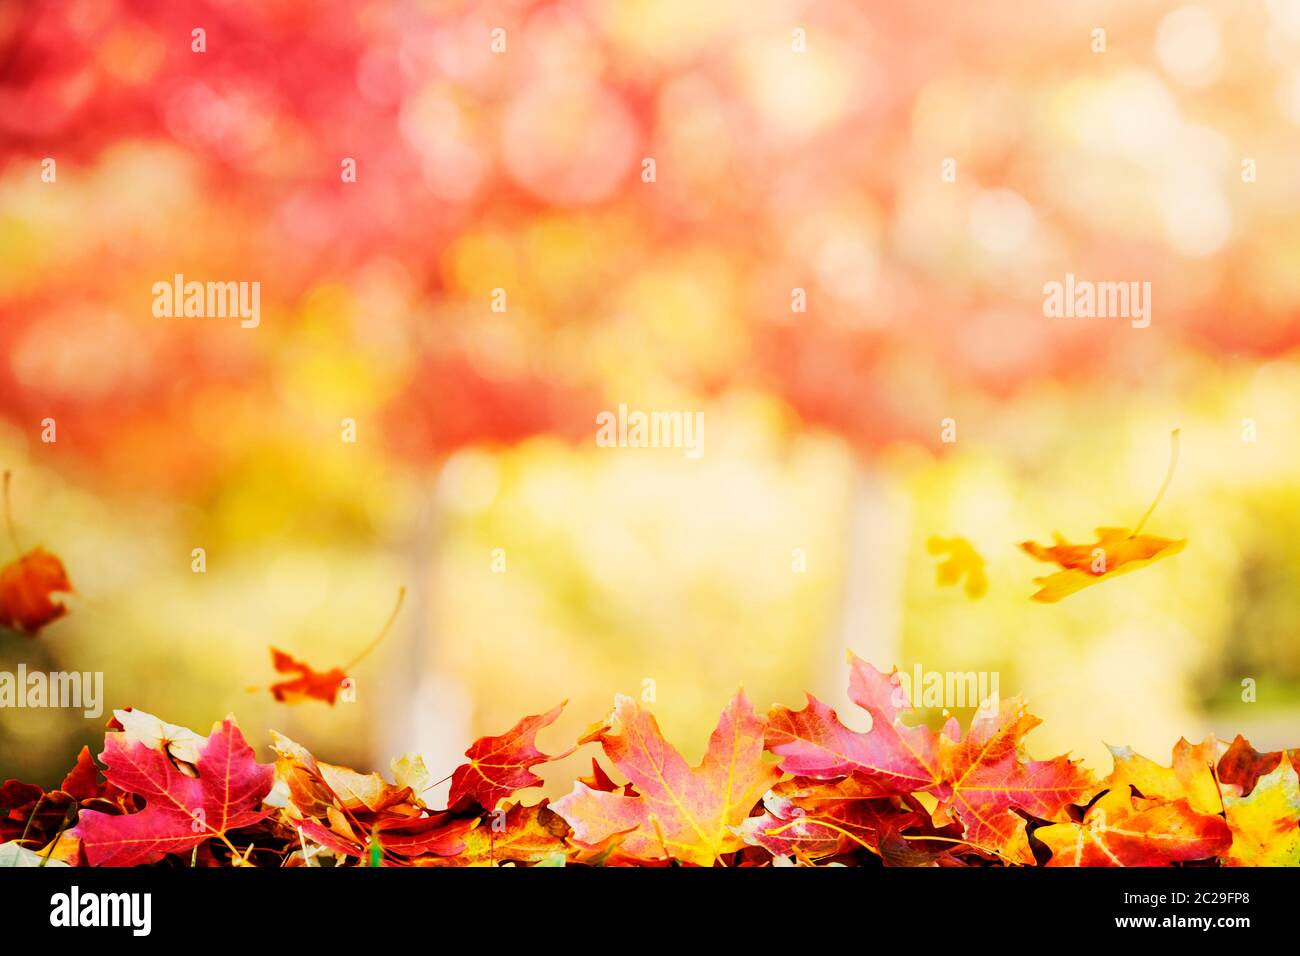 Autumn background with falling leaves Stock Photo